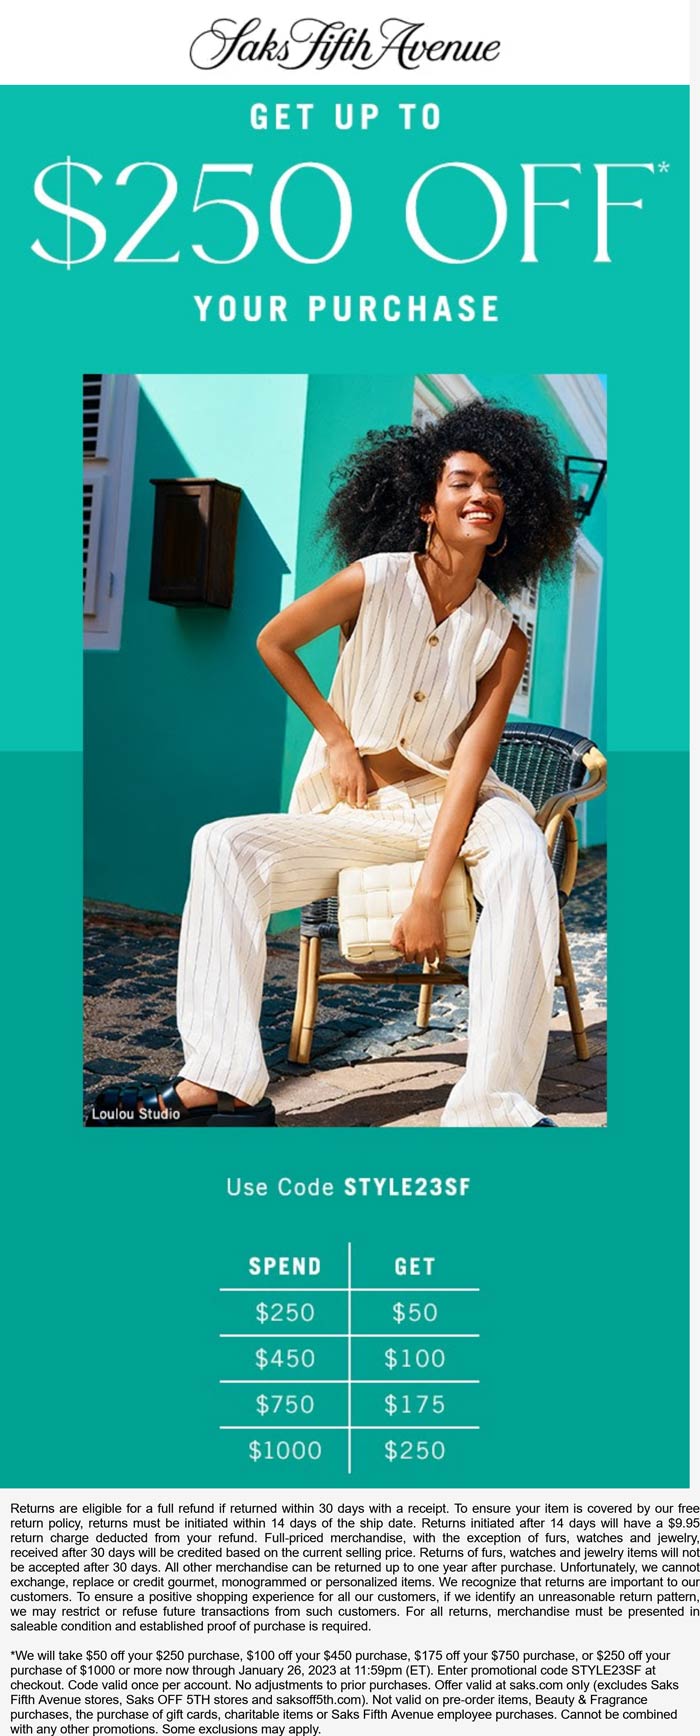 Saks Fifth Avenue stores Coupon  $50-$250 off $250+ online today at Saks Fifth Avenue via promo code STYLE23SF #saksfifthavenue 